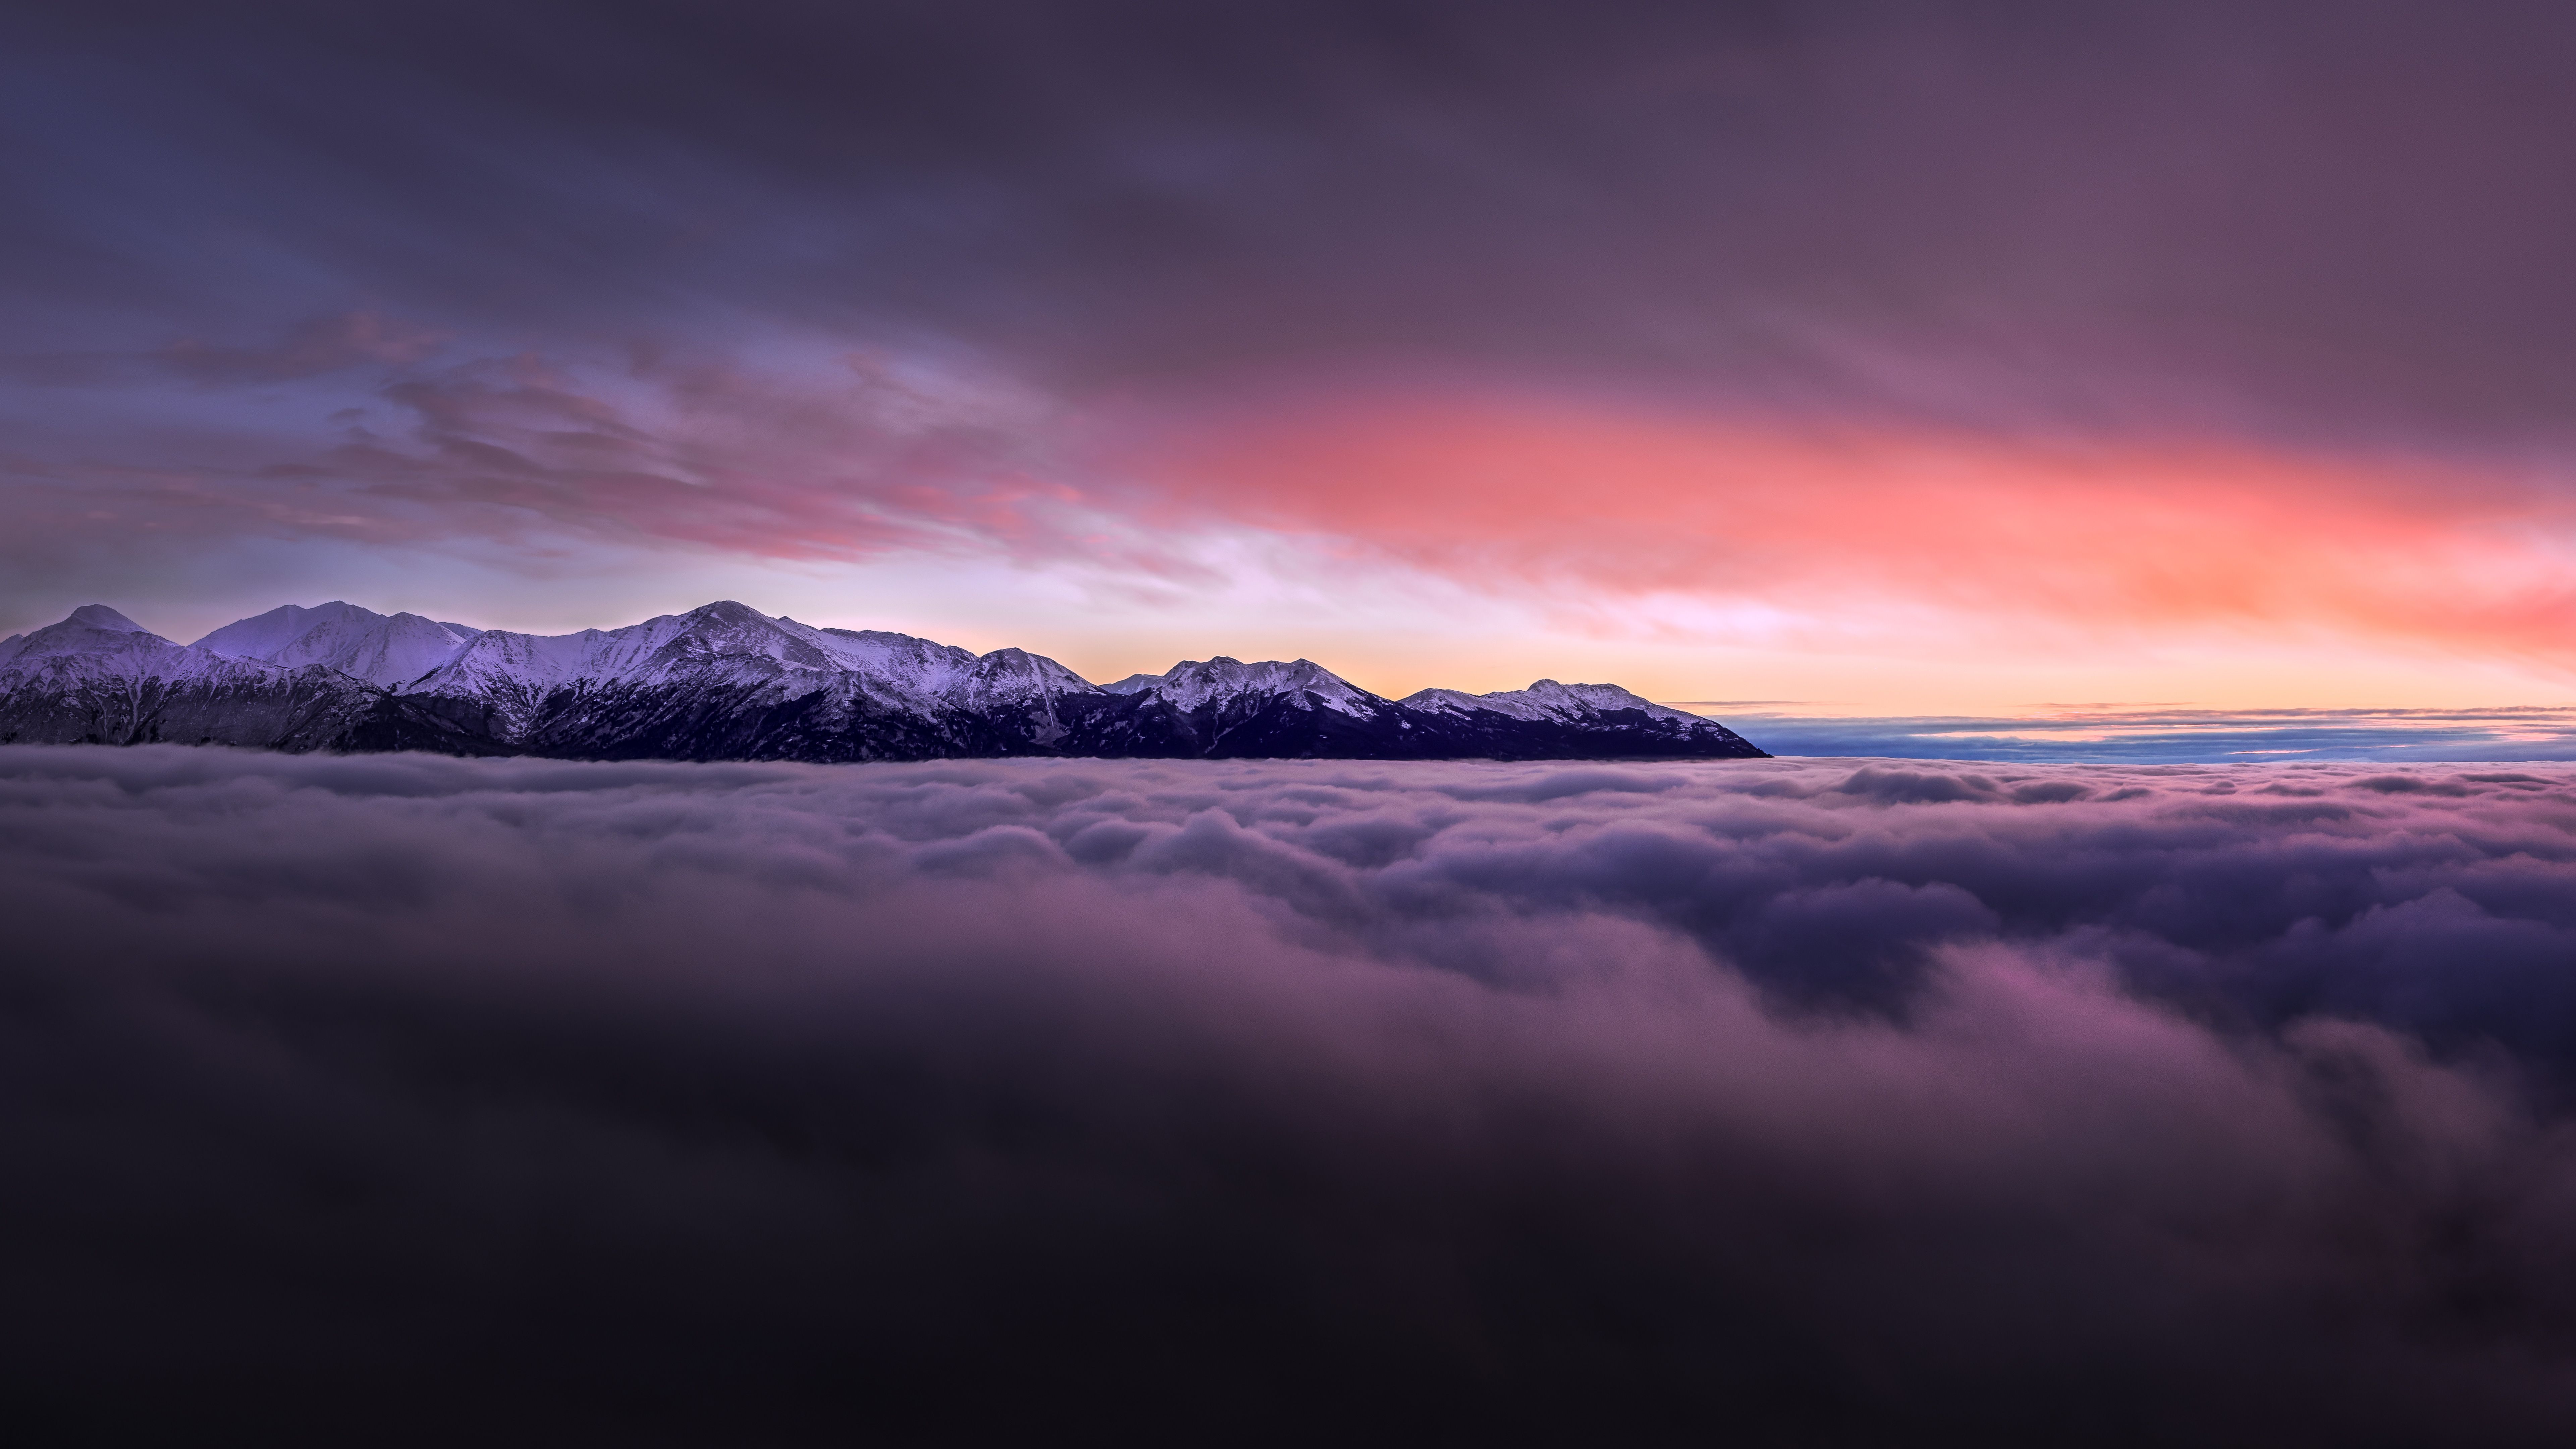 General 7680x4320 landscape nature mountains clouds sunset low light snowy mountain